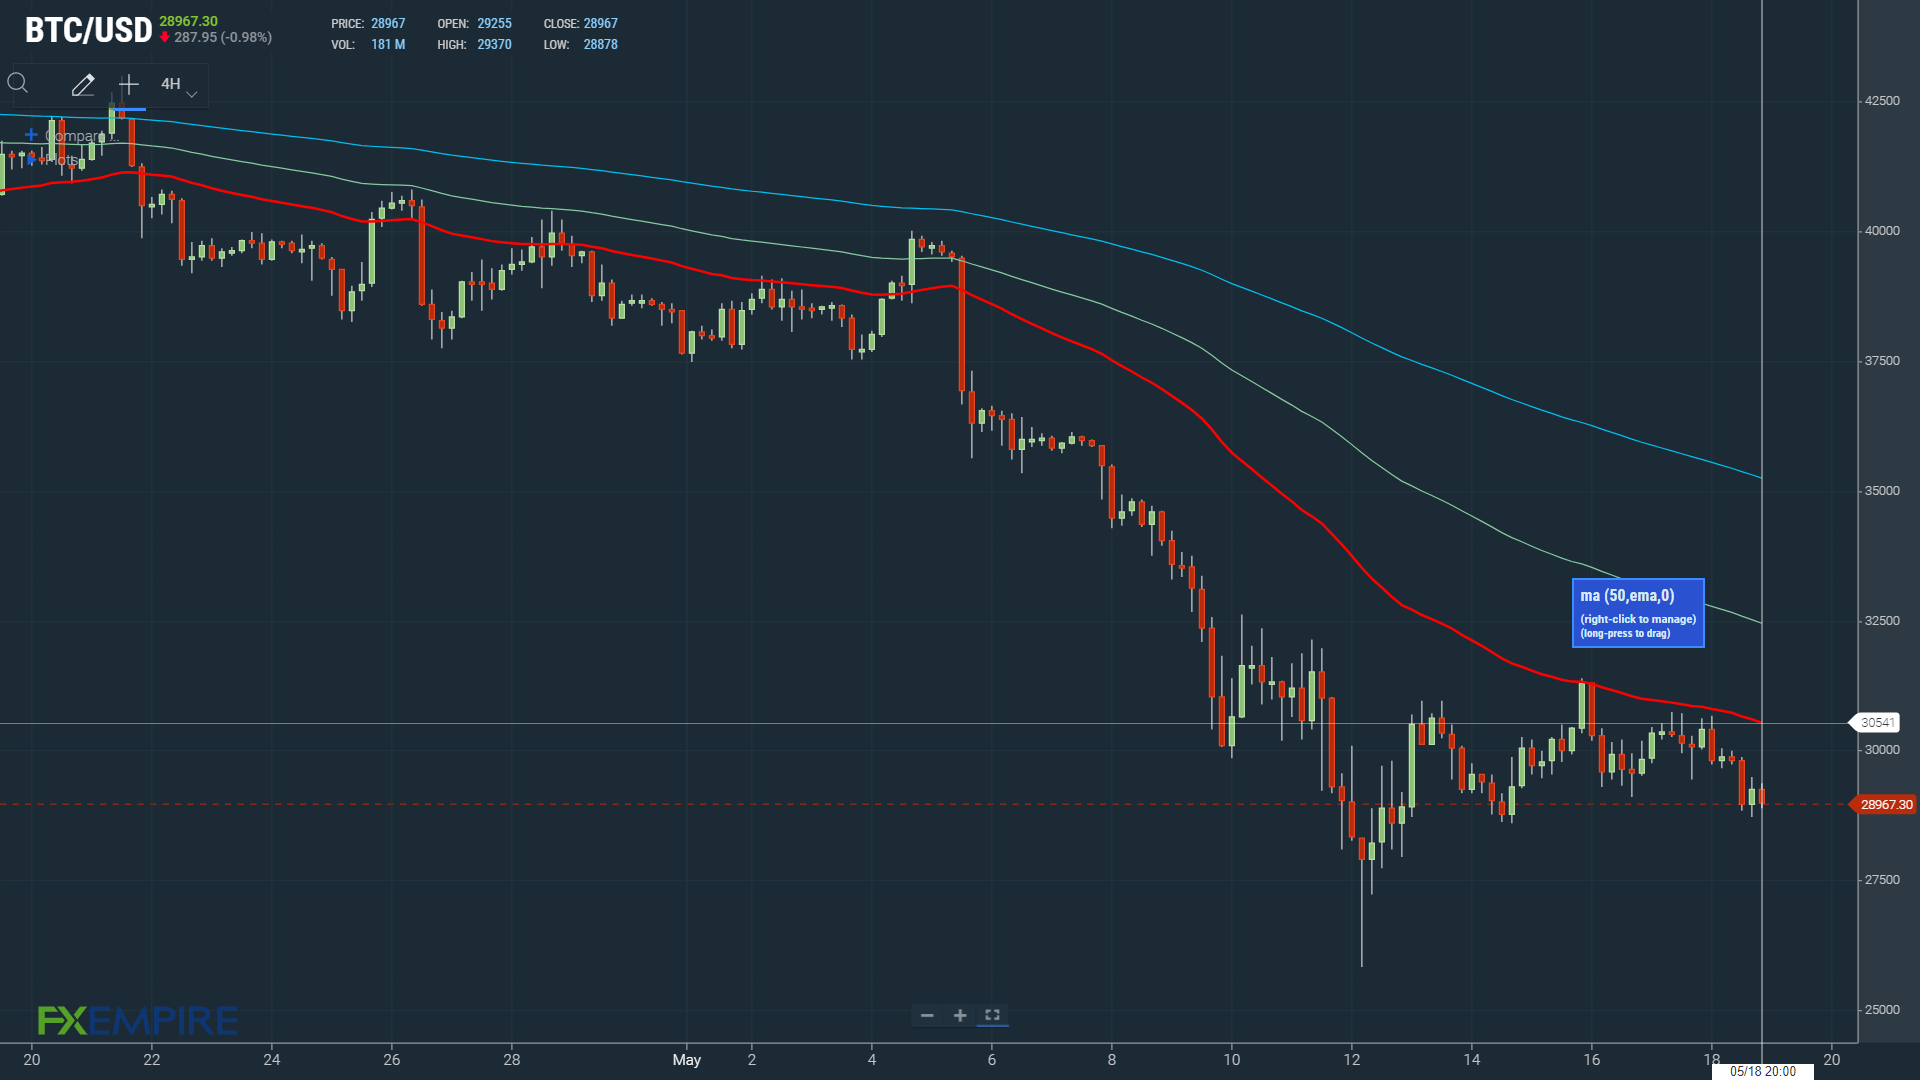 Failure to move through the 50-day EMA would leave BTC under pressure.